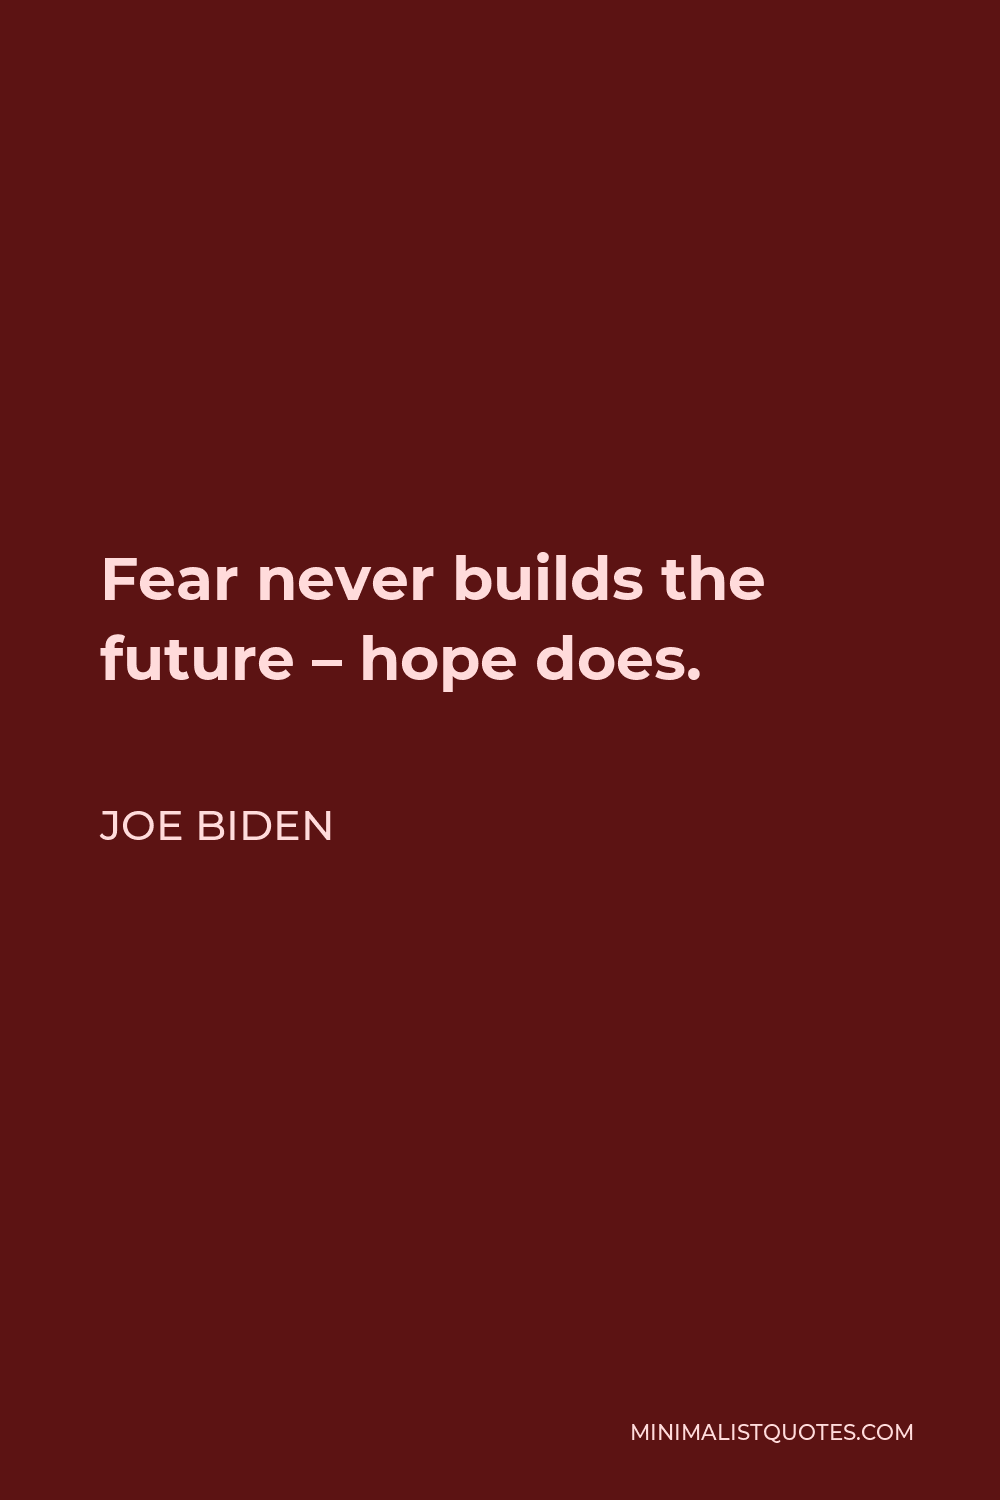 Joe Biden Quote - Fear never builds the future – hope does.